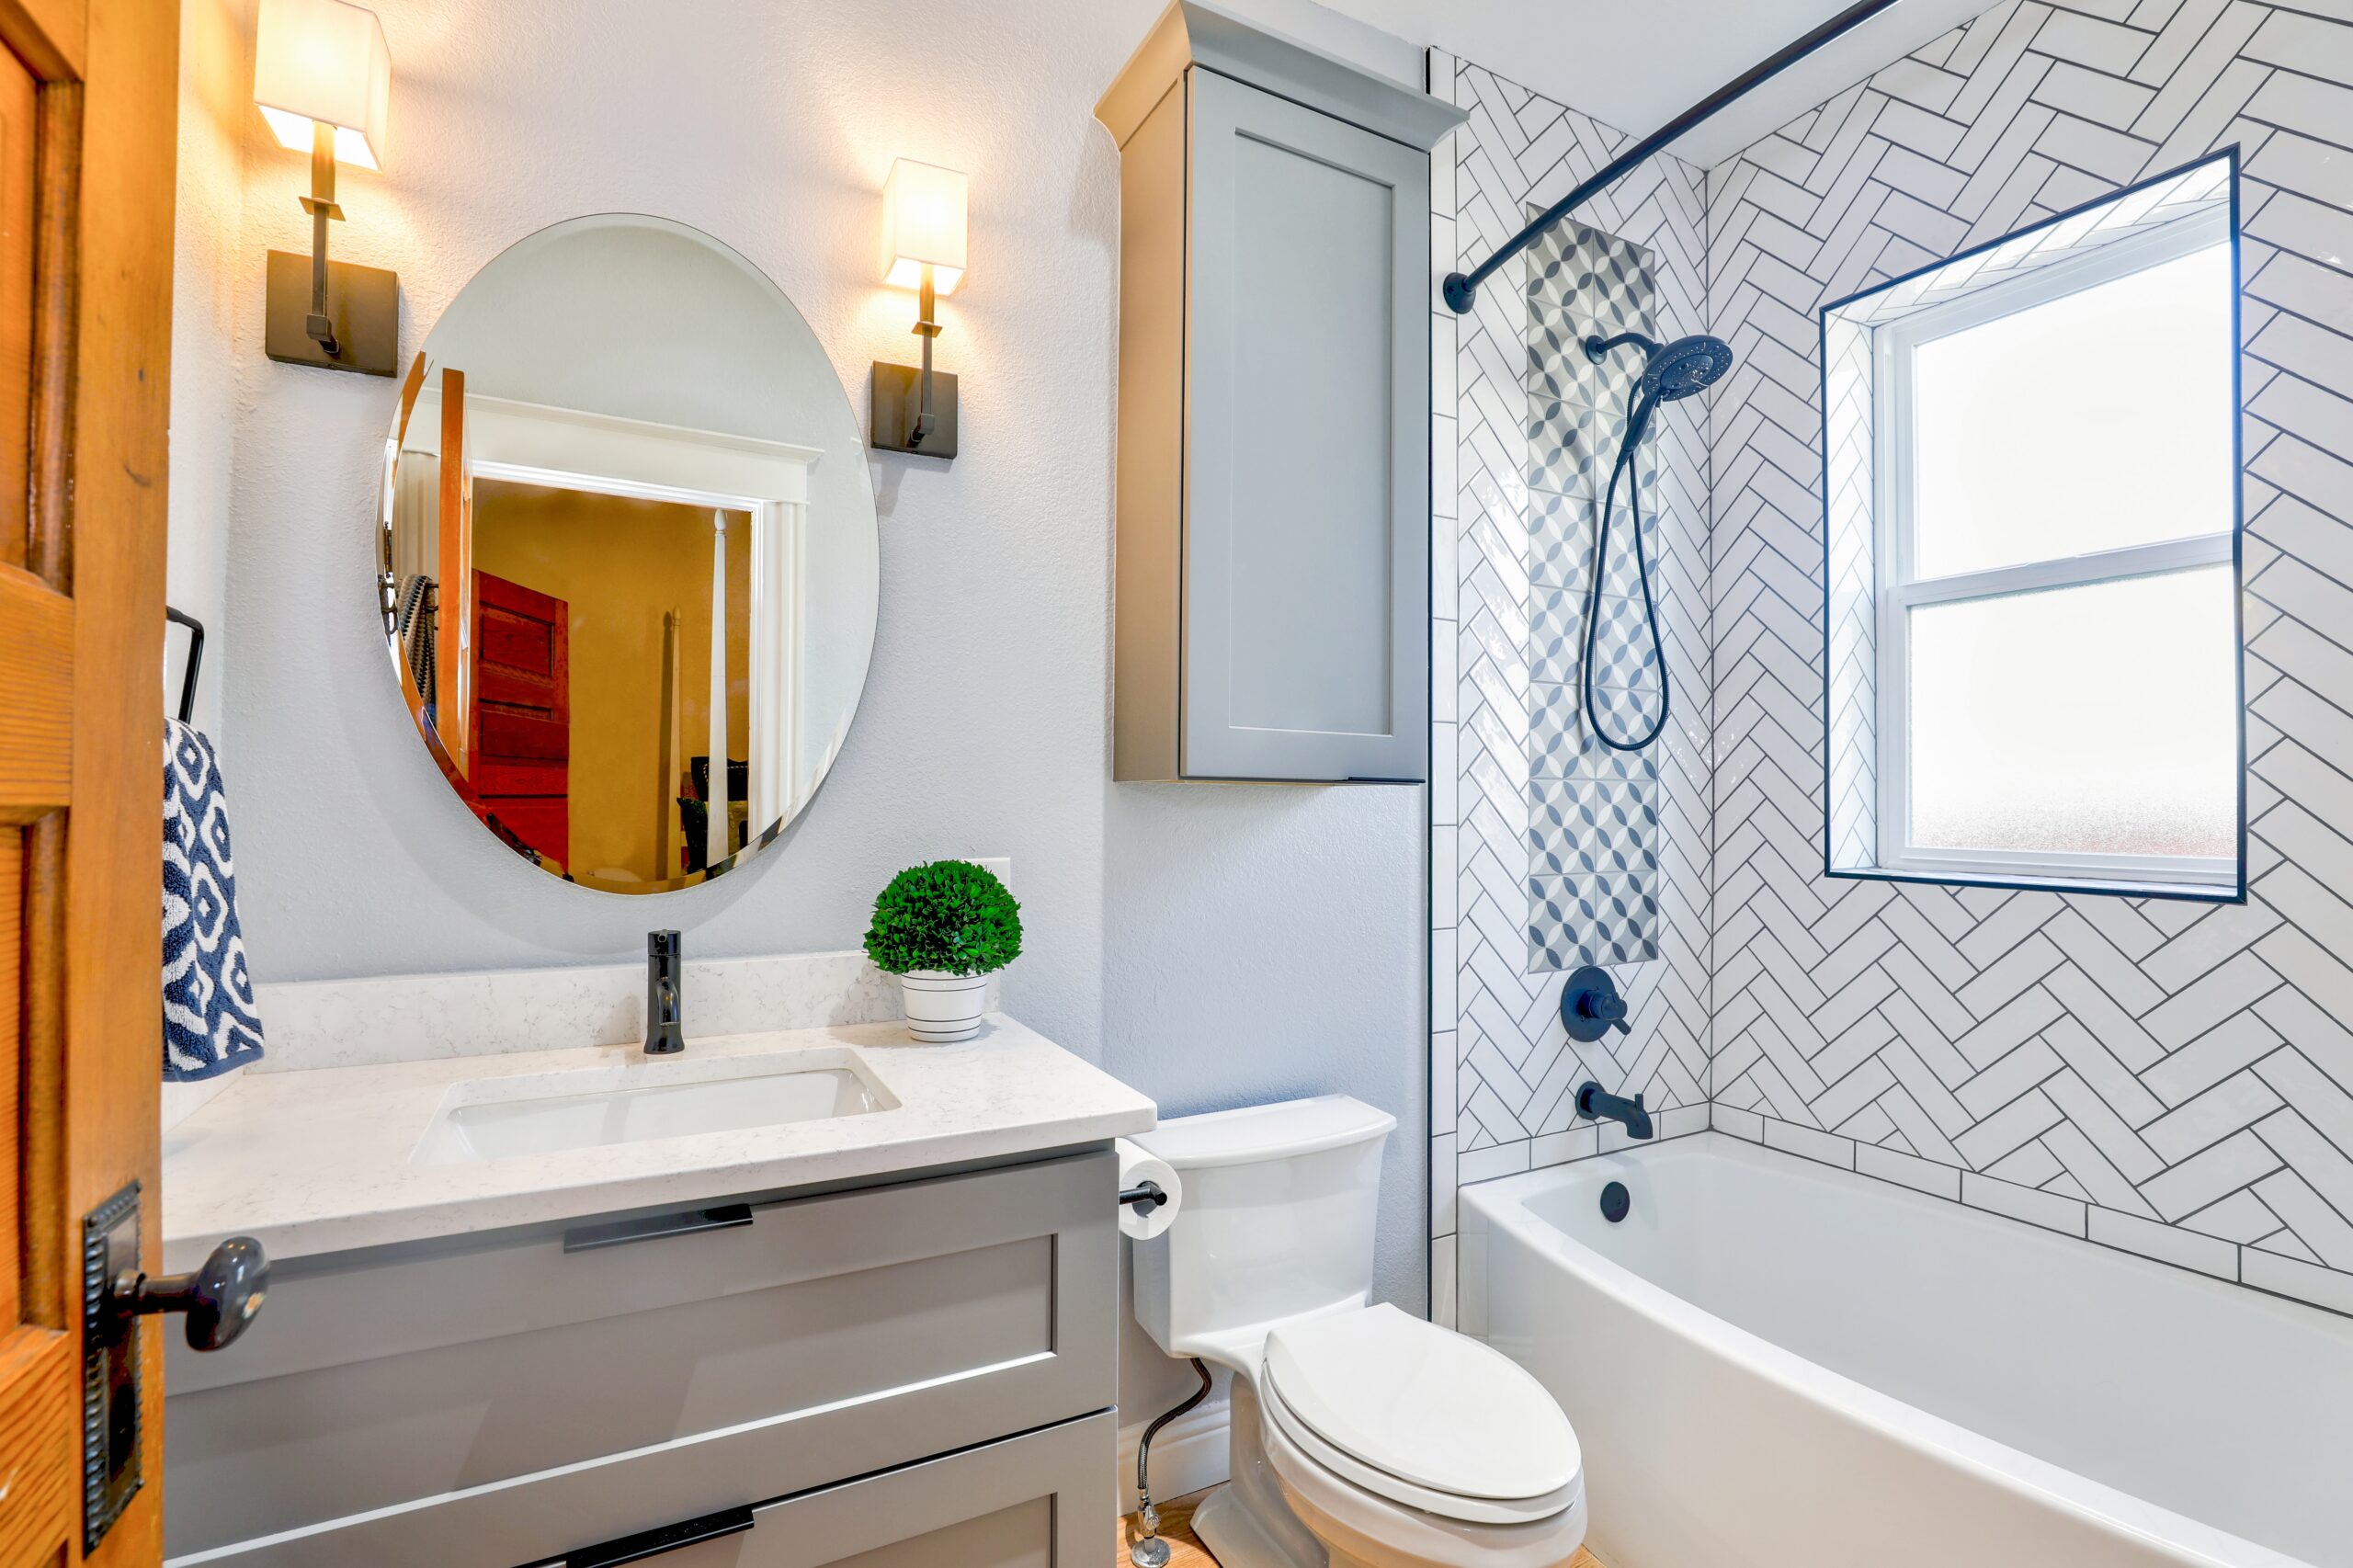 9 Ideas to Inspire Your Next Bathroom Remodeling Project